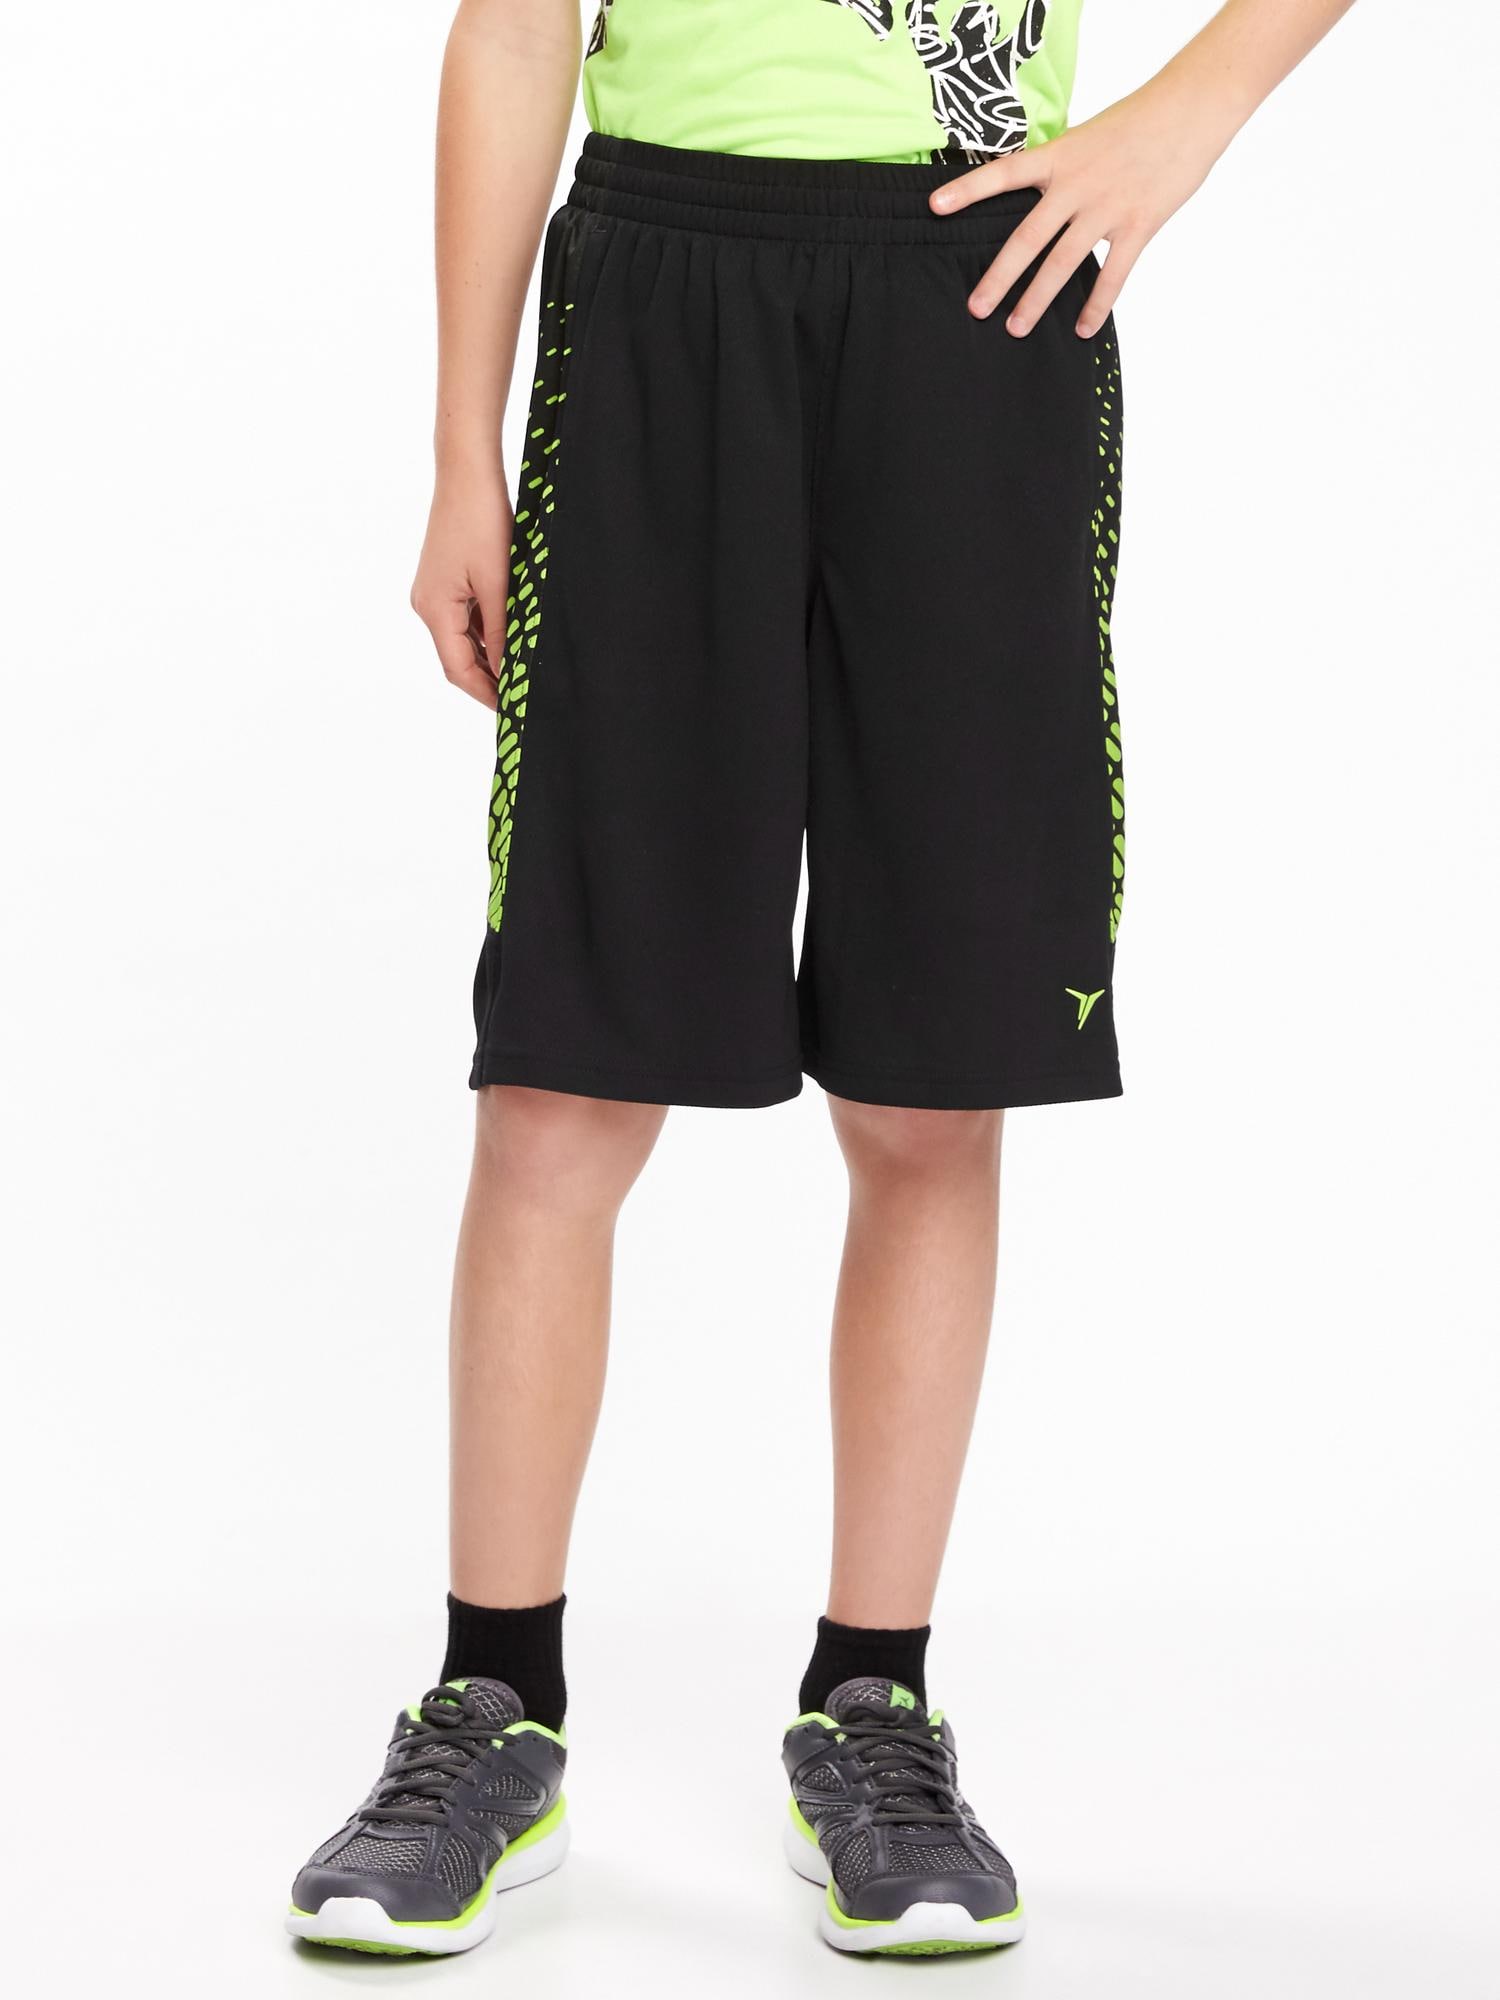 Go-Dry Cool Basketball Shorts For Boys | Old Navy